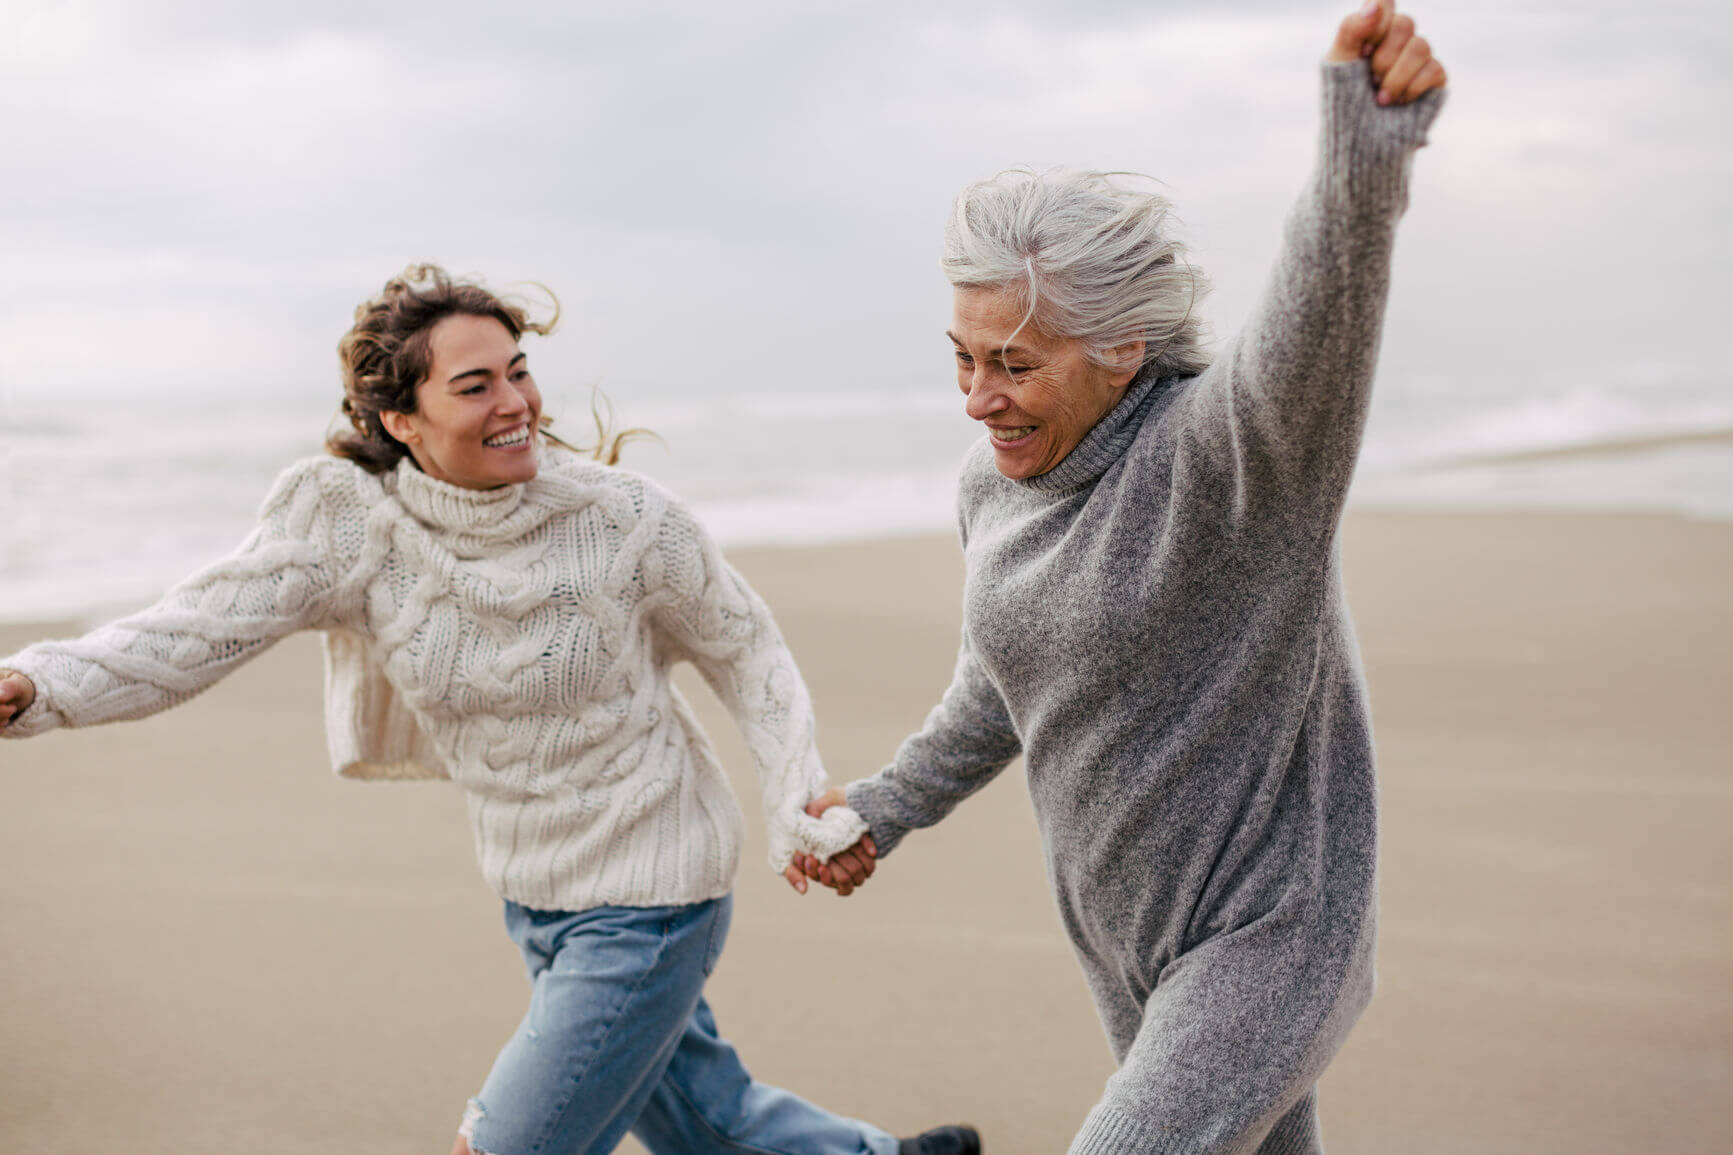 two women walk and celebrate along a windswept beach. Regular exercise can help with the management of osteoarthritis